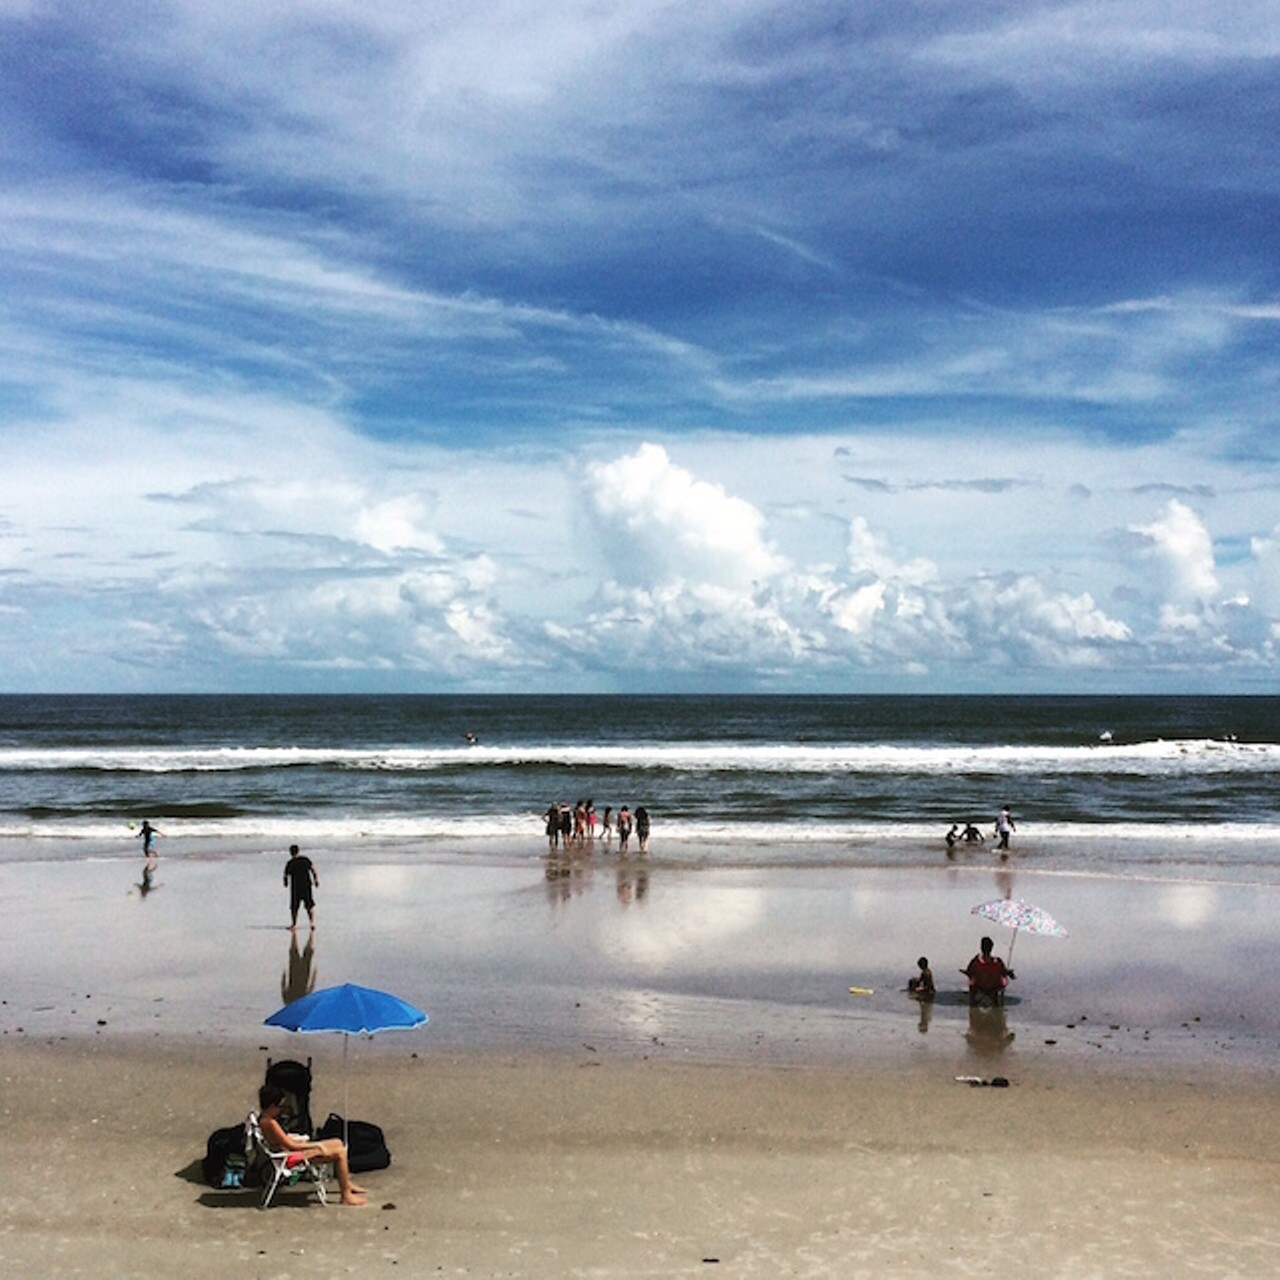 Soaking it all in at New Smyrna Beach